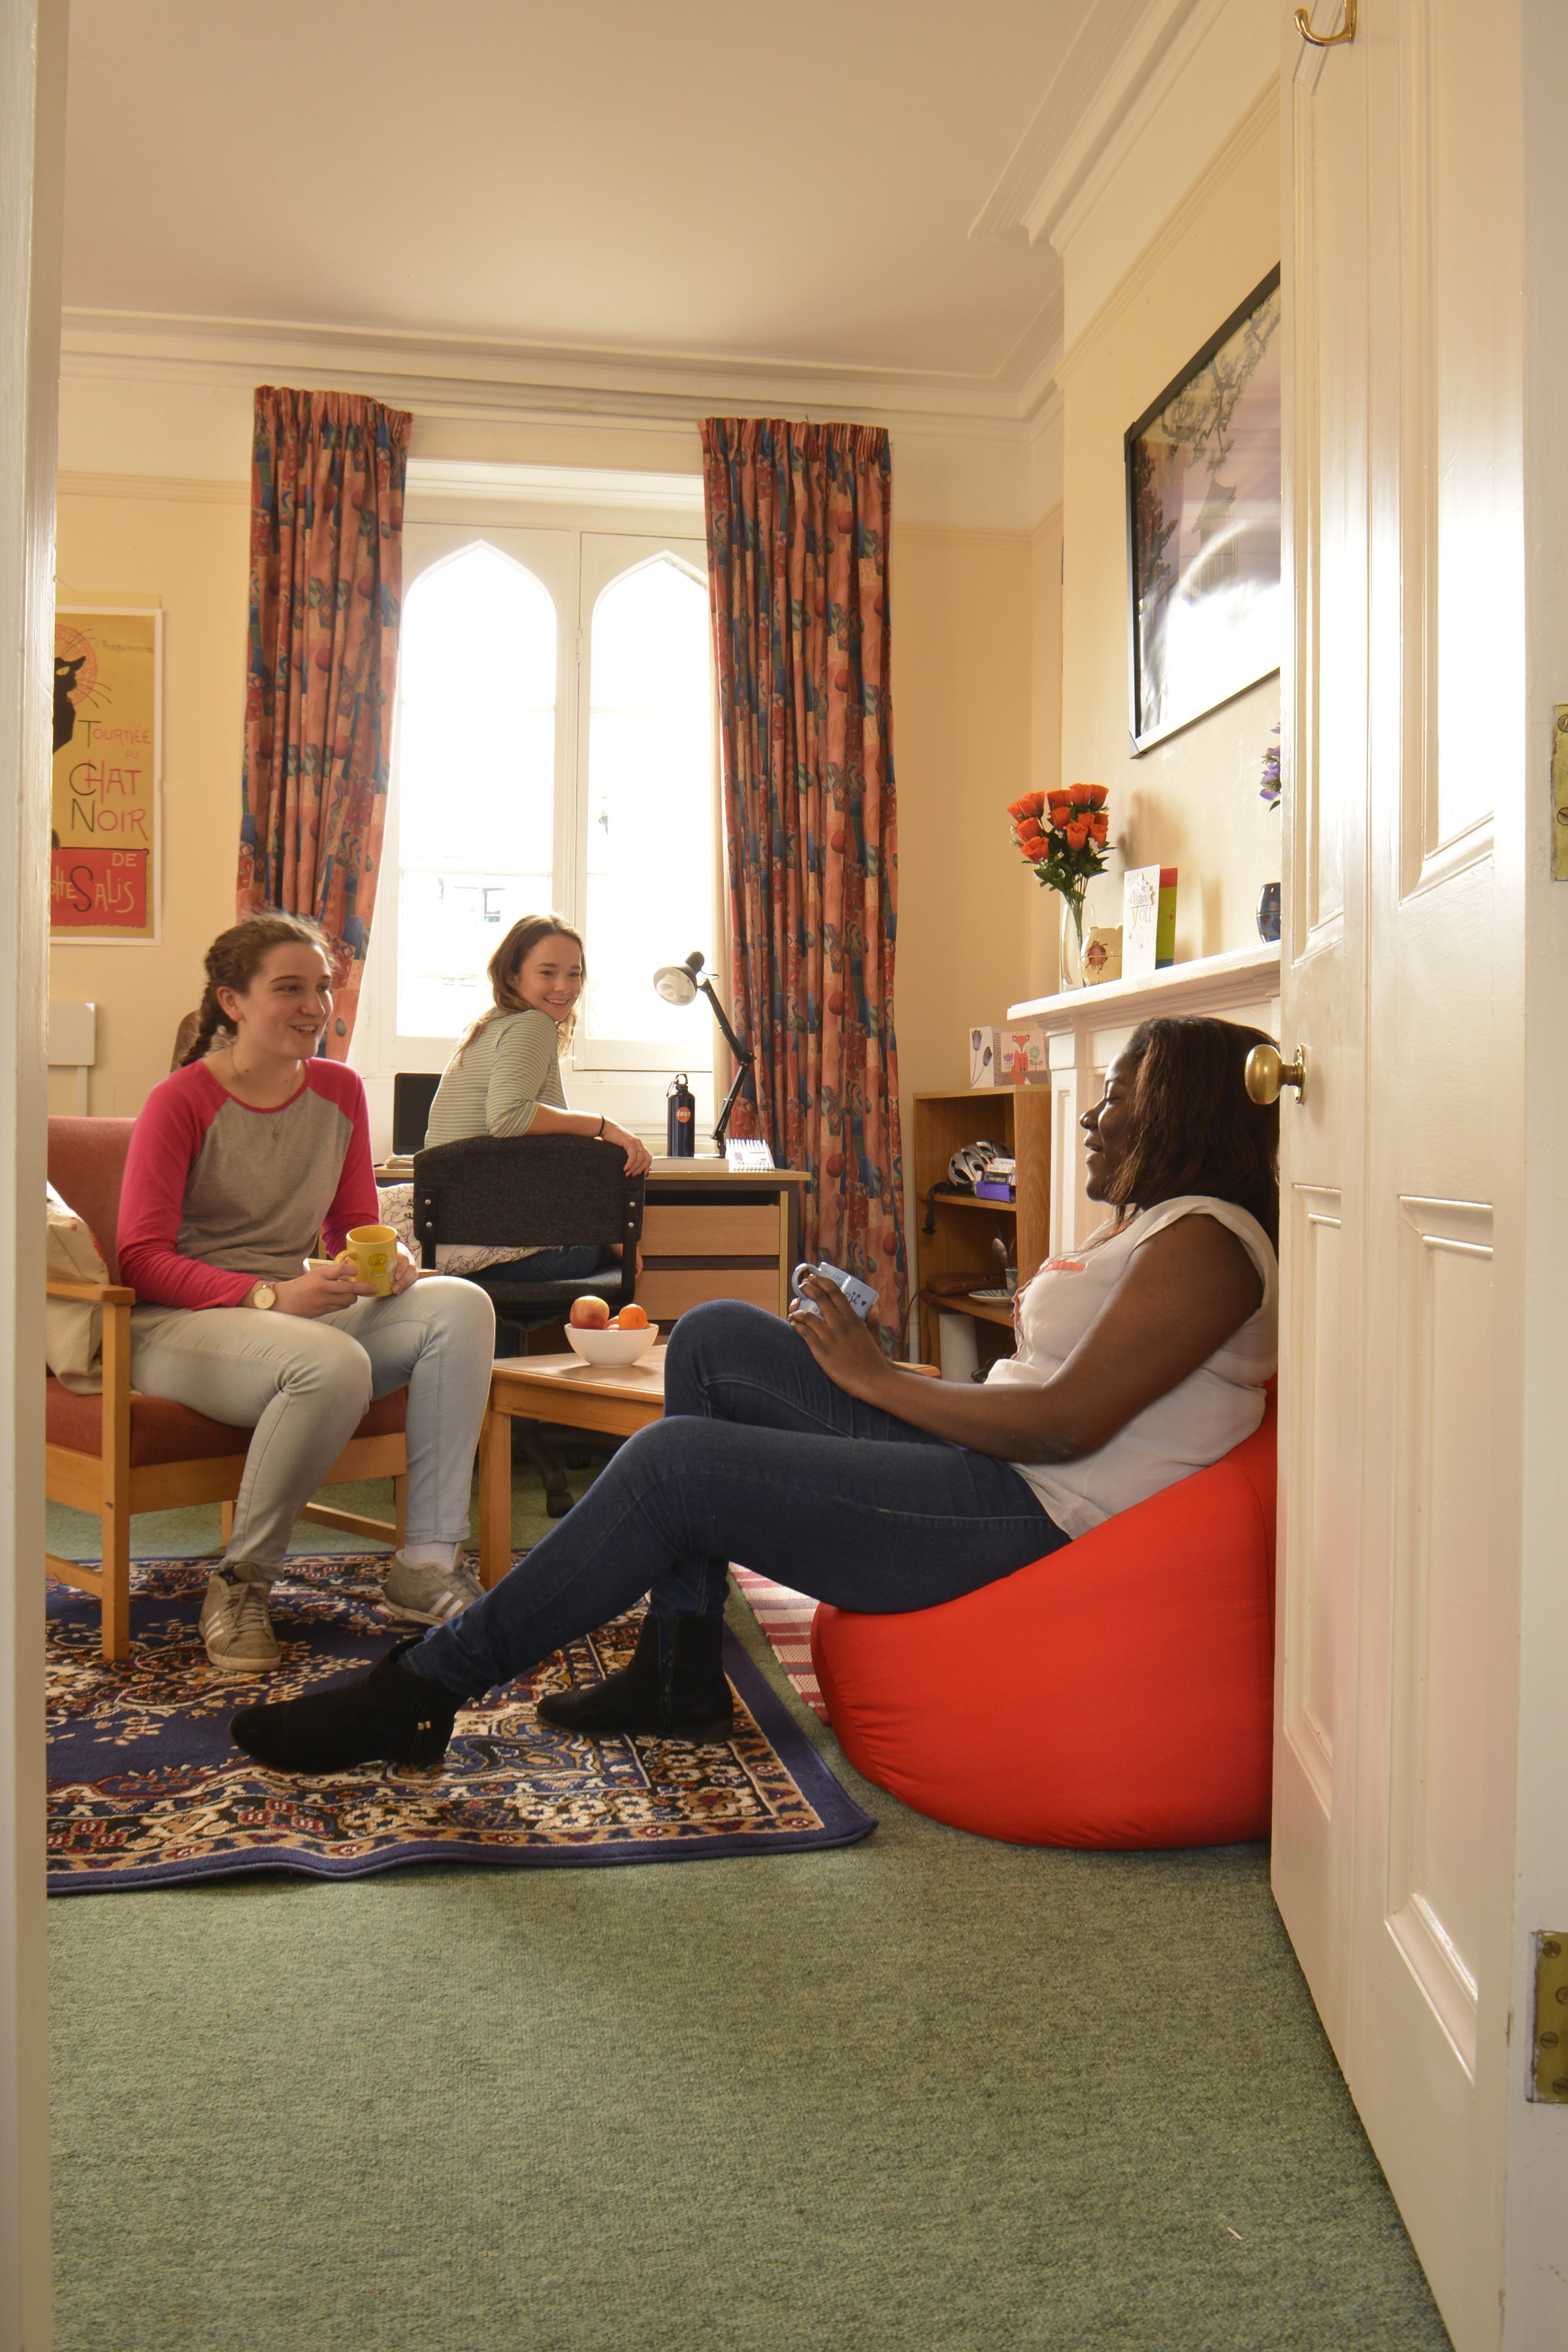 Students in a student room